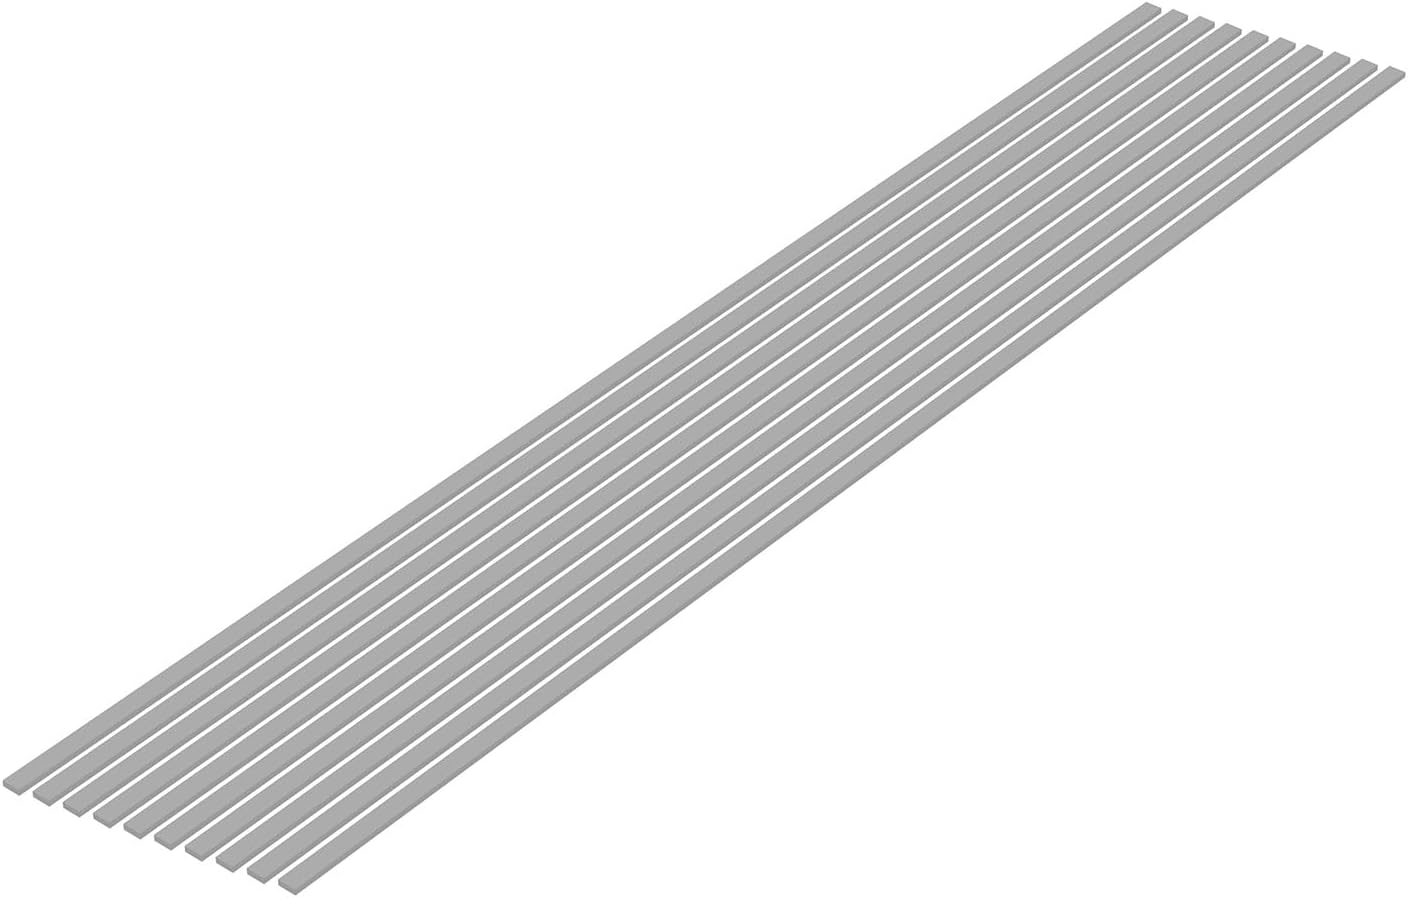 Wave Material Series OM-487 Plastic Material Gray Shredded Board 0.04 x 0.28 inches (1.0 x 7.0 mm), 10 Pieces - BanzaiHobby